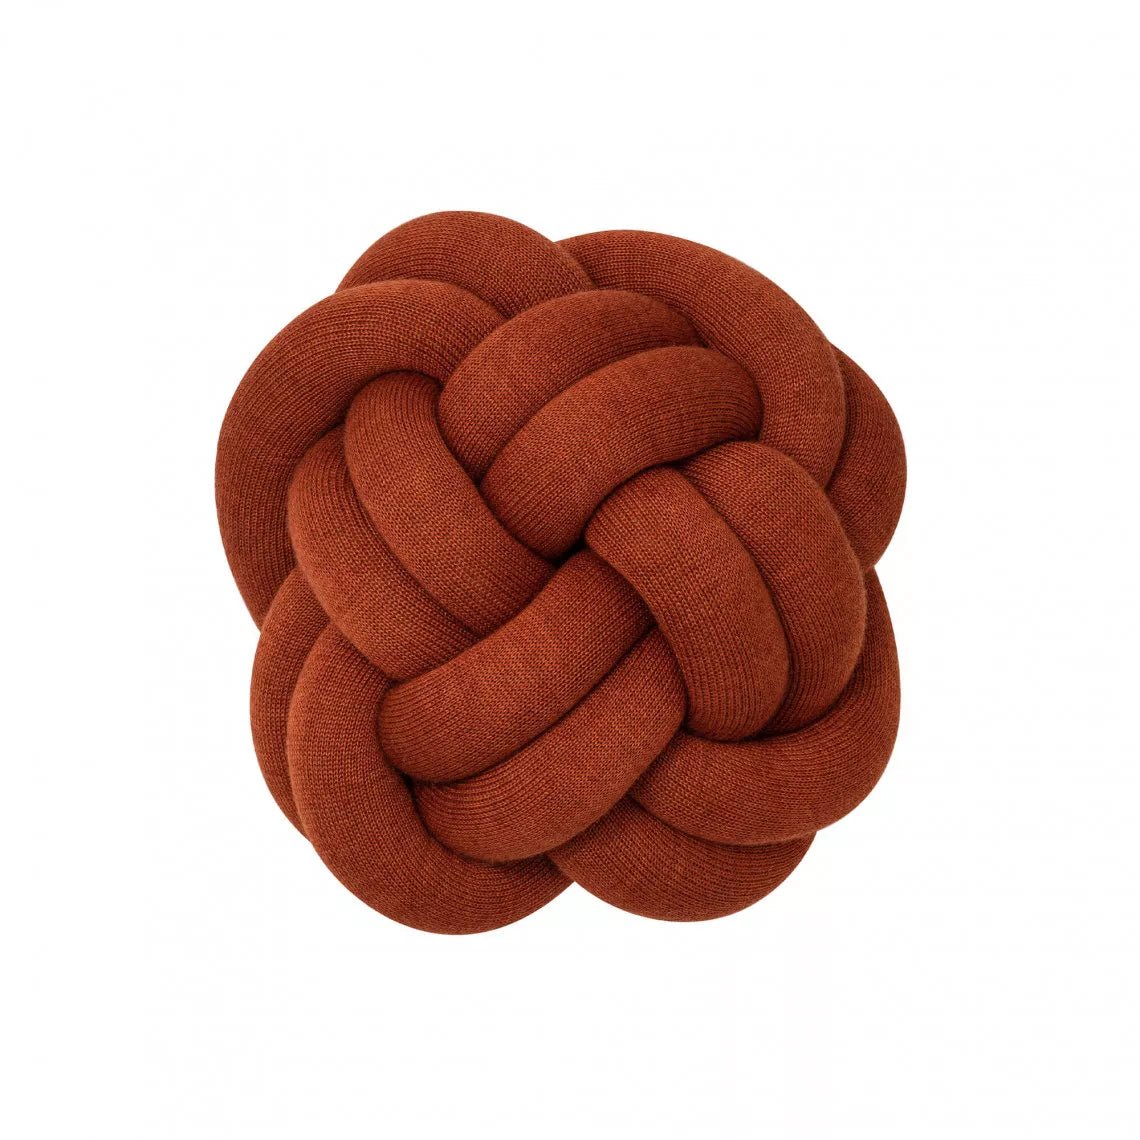 Knot Cusion - Knot Pillow